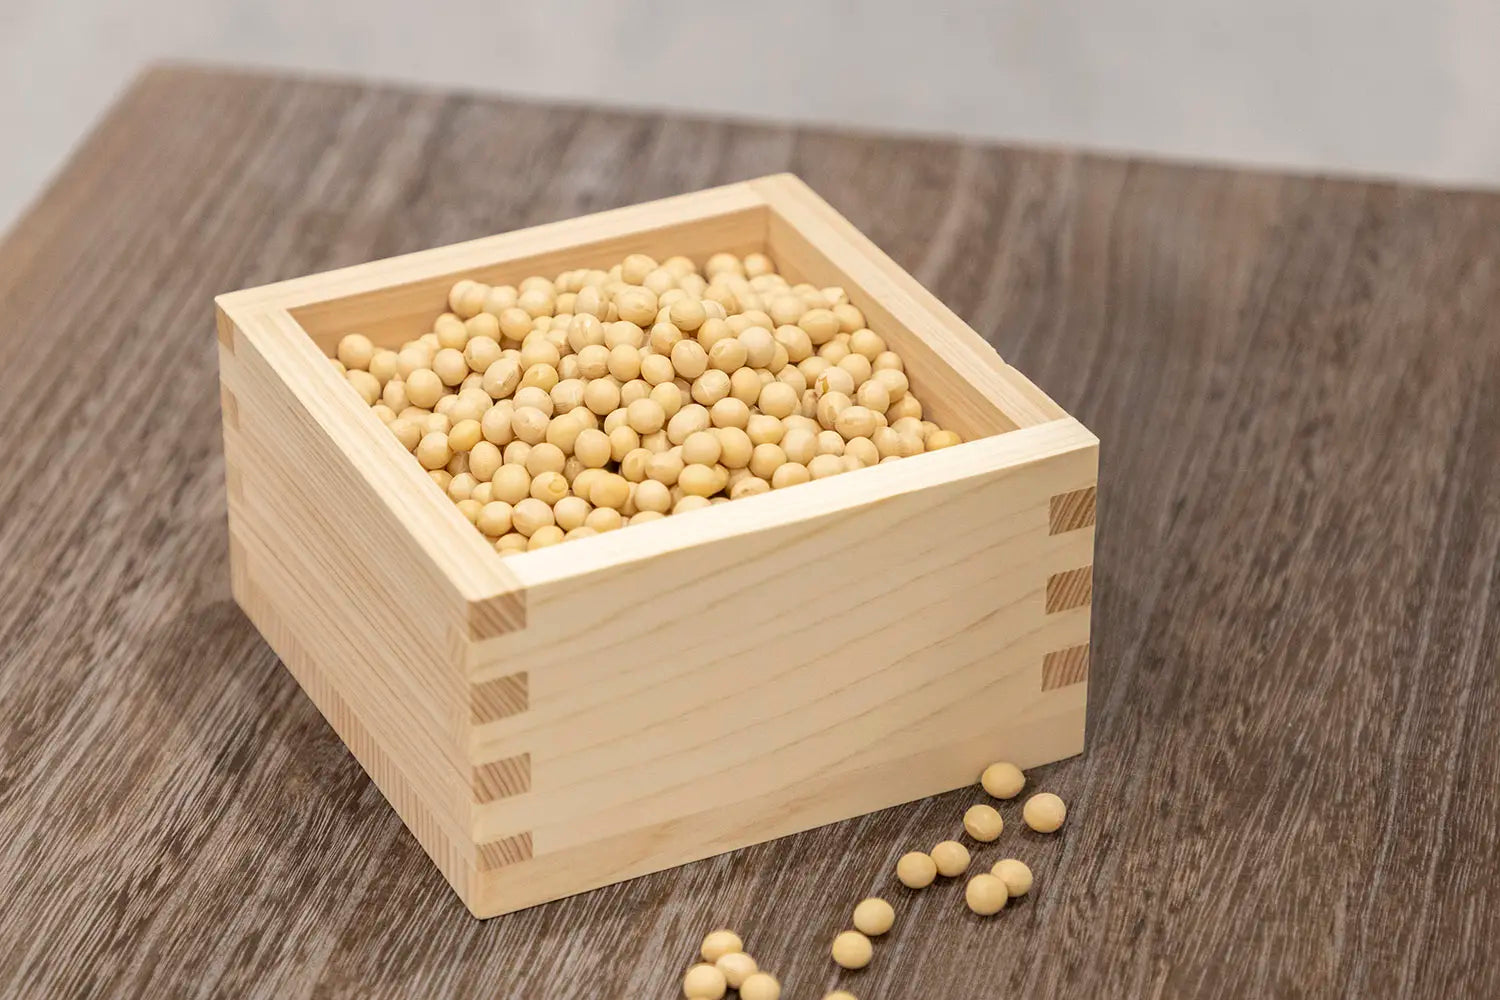 Soybeans in a box